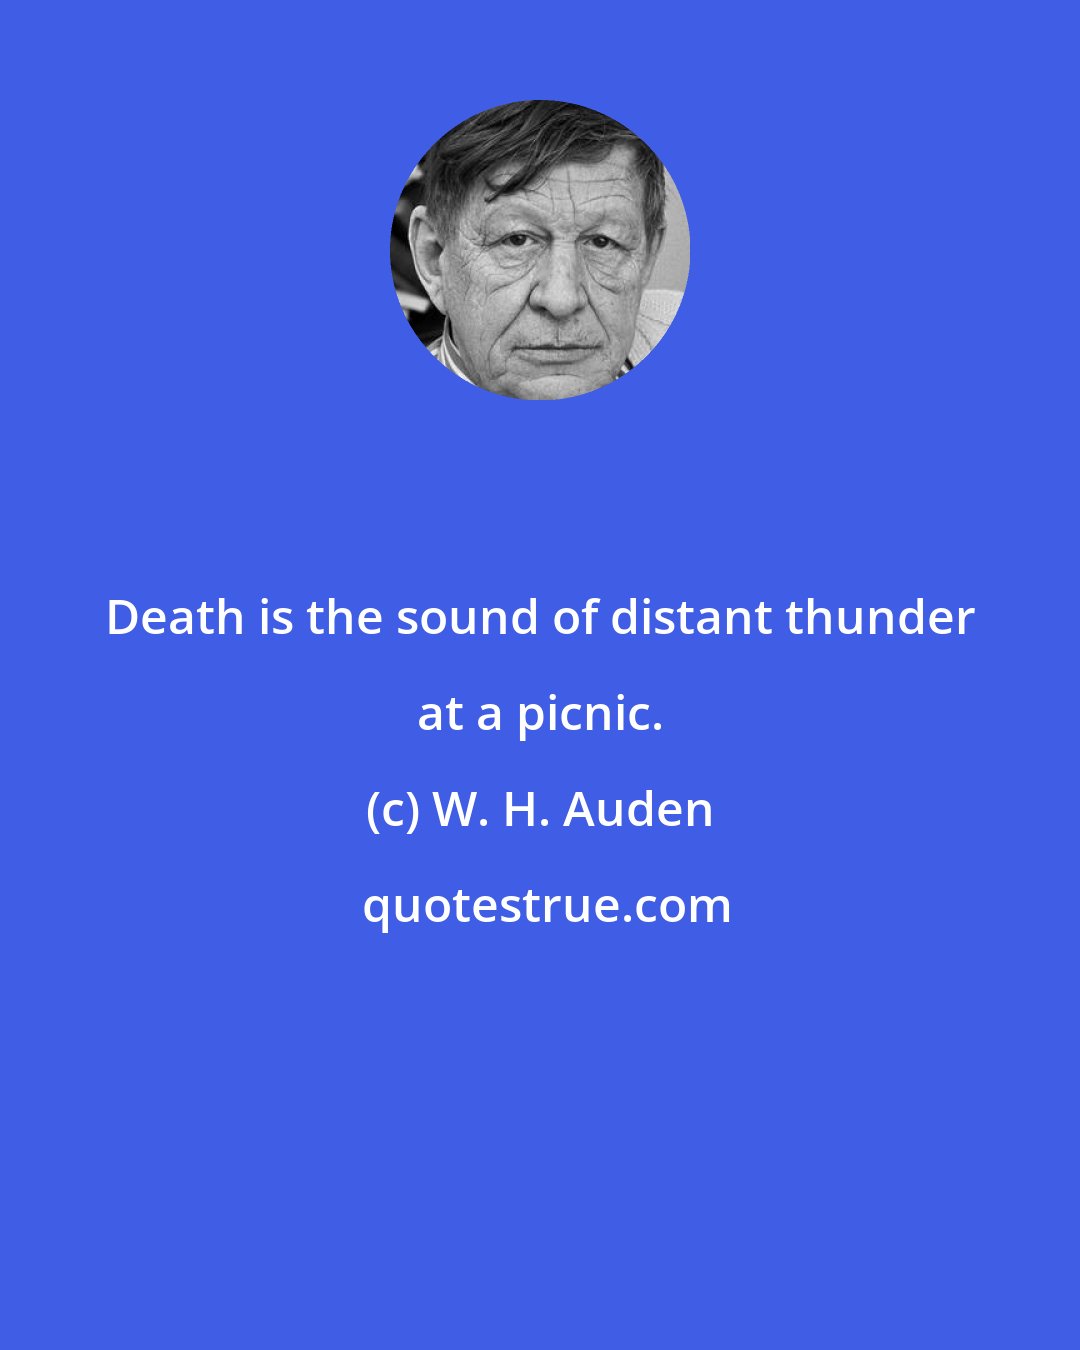 W. H. Auden: Death is the sound of distant thunder at a picnic.